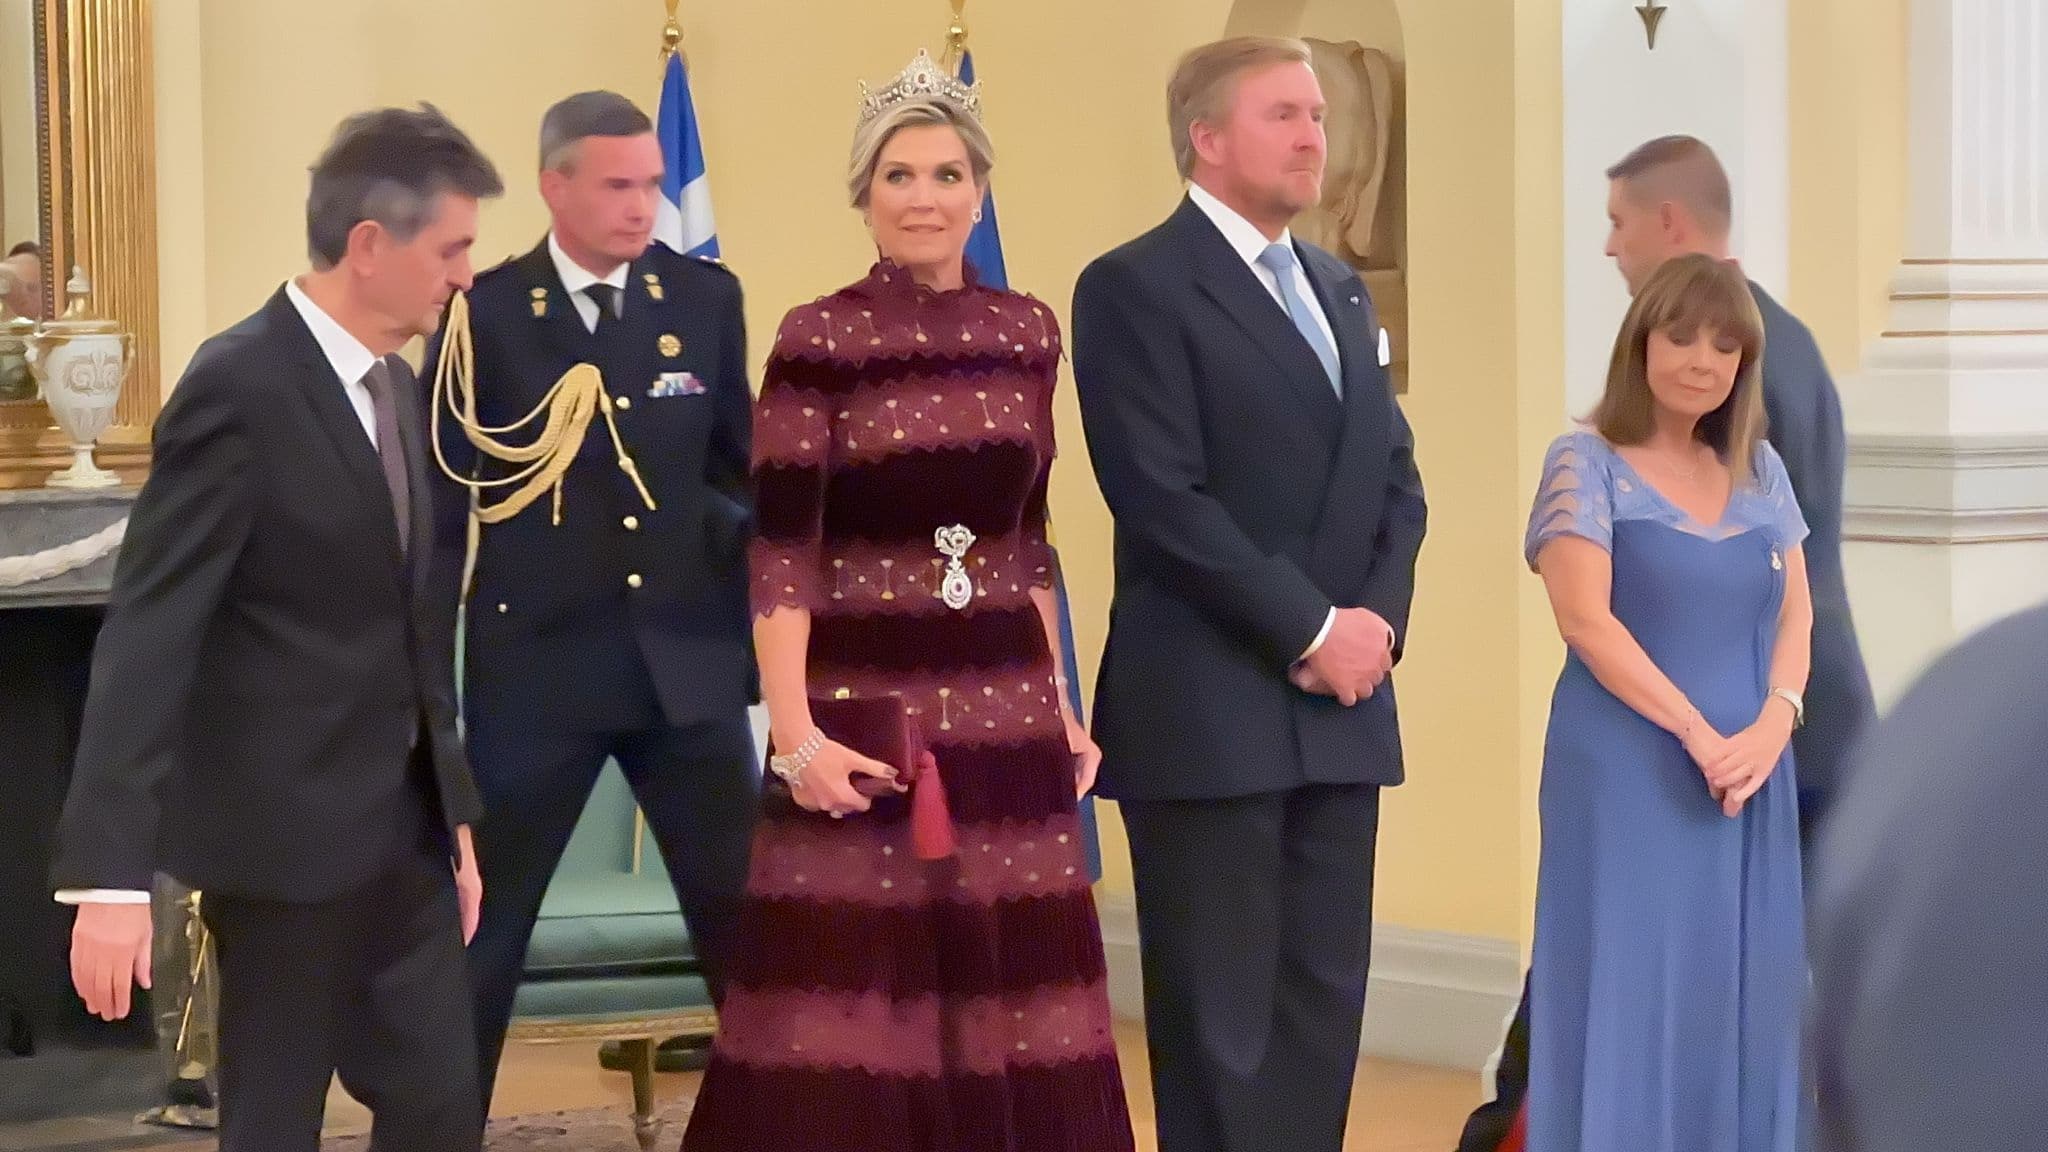 Maxima shines in a new evening dress during a Greek official banquet